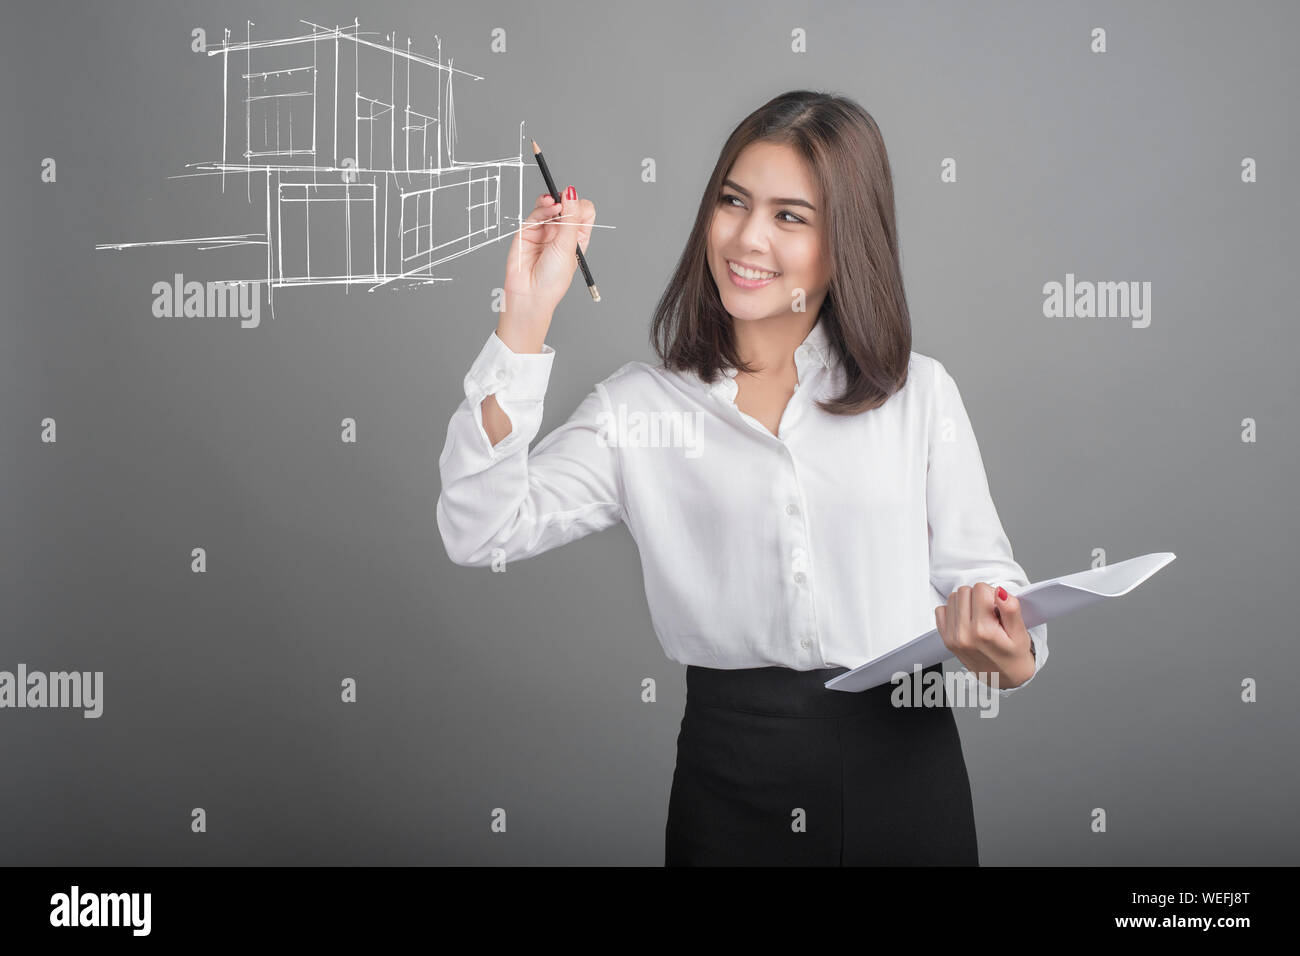 Digital Composite Image Of Architecture Drawing While Standing Against Gray Background Stock Photo